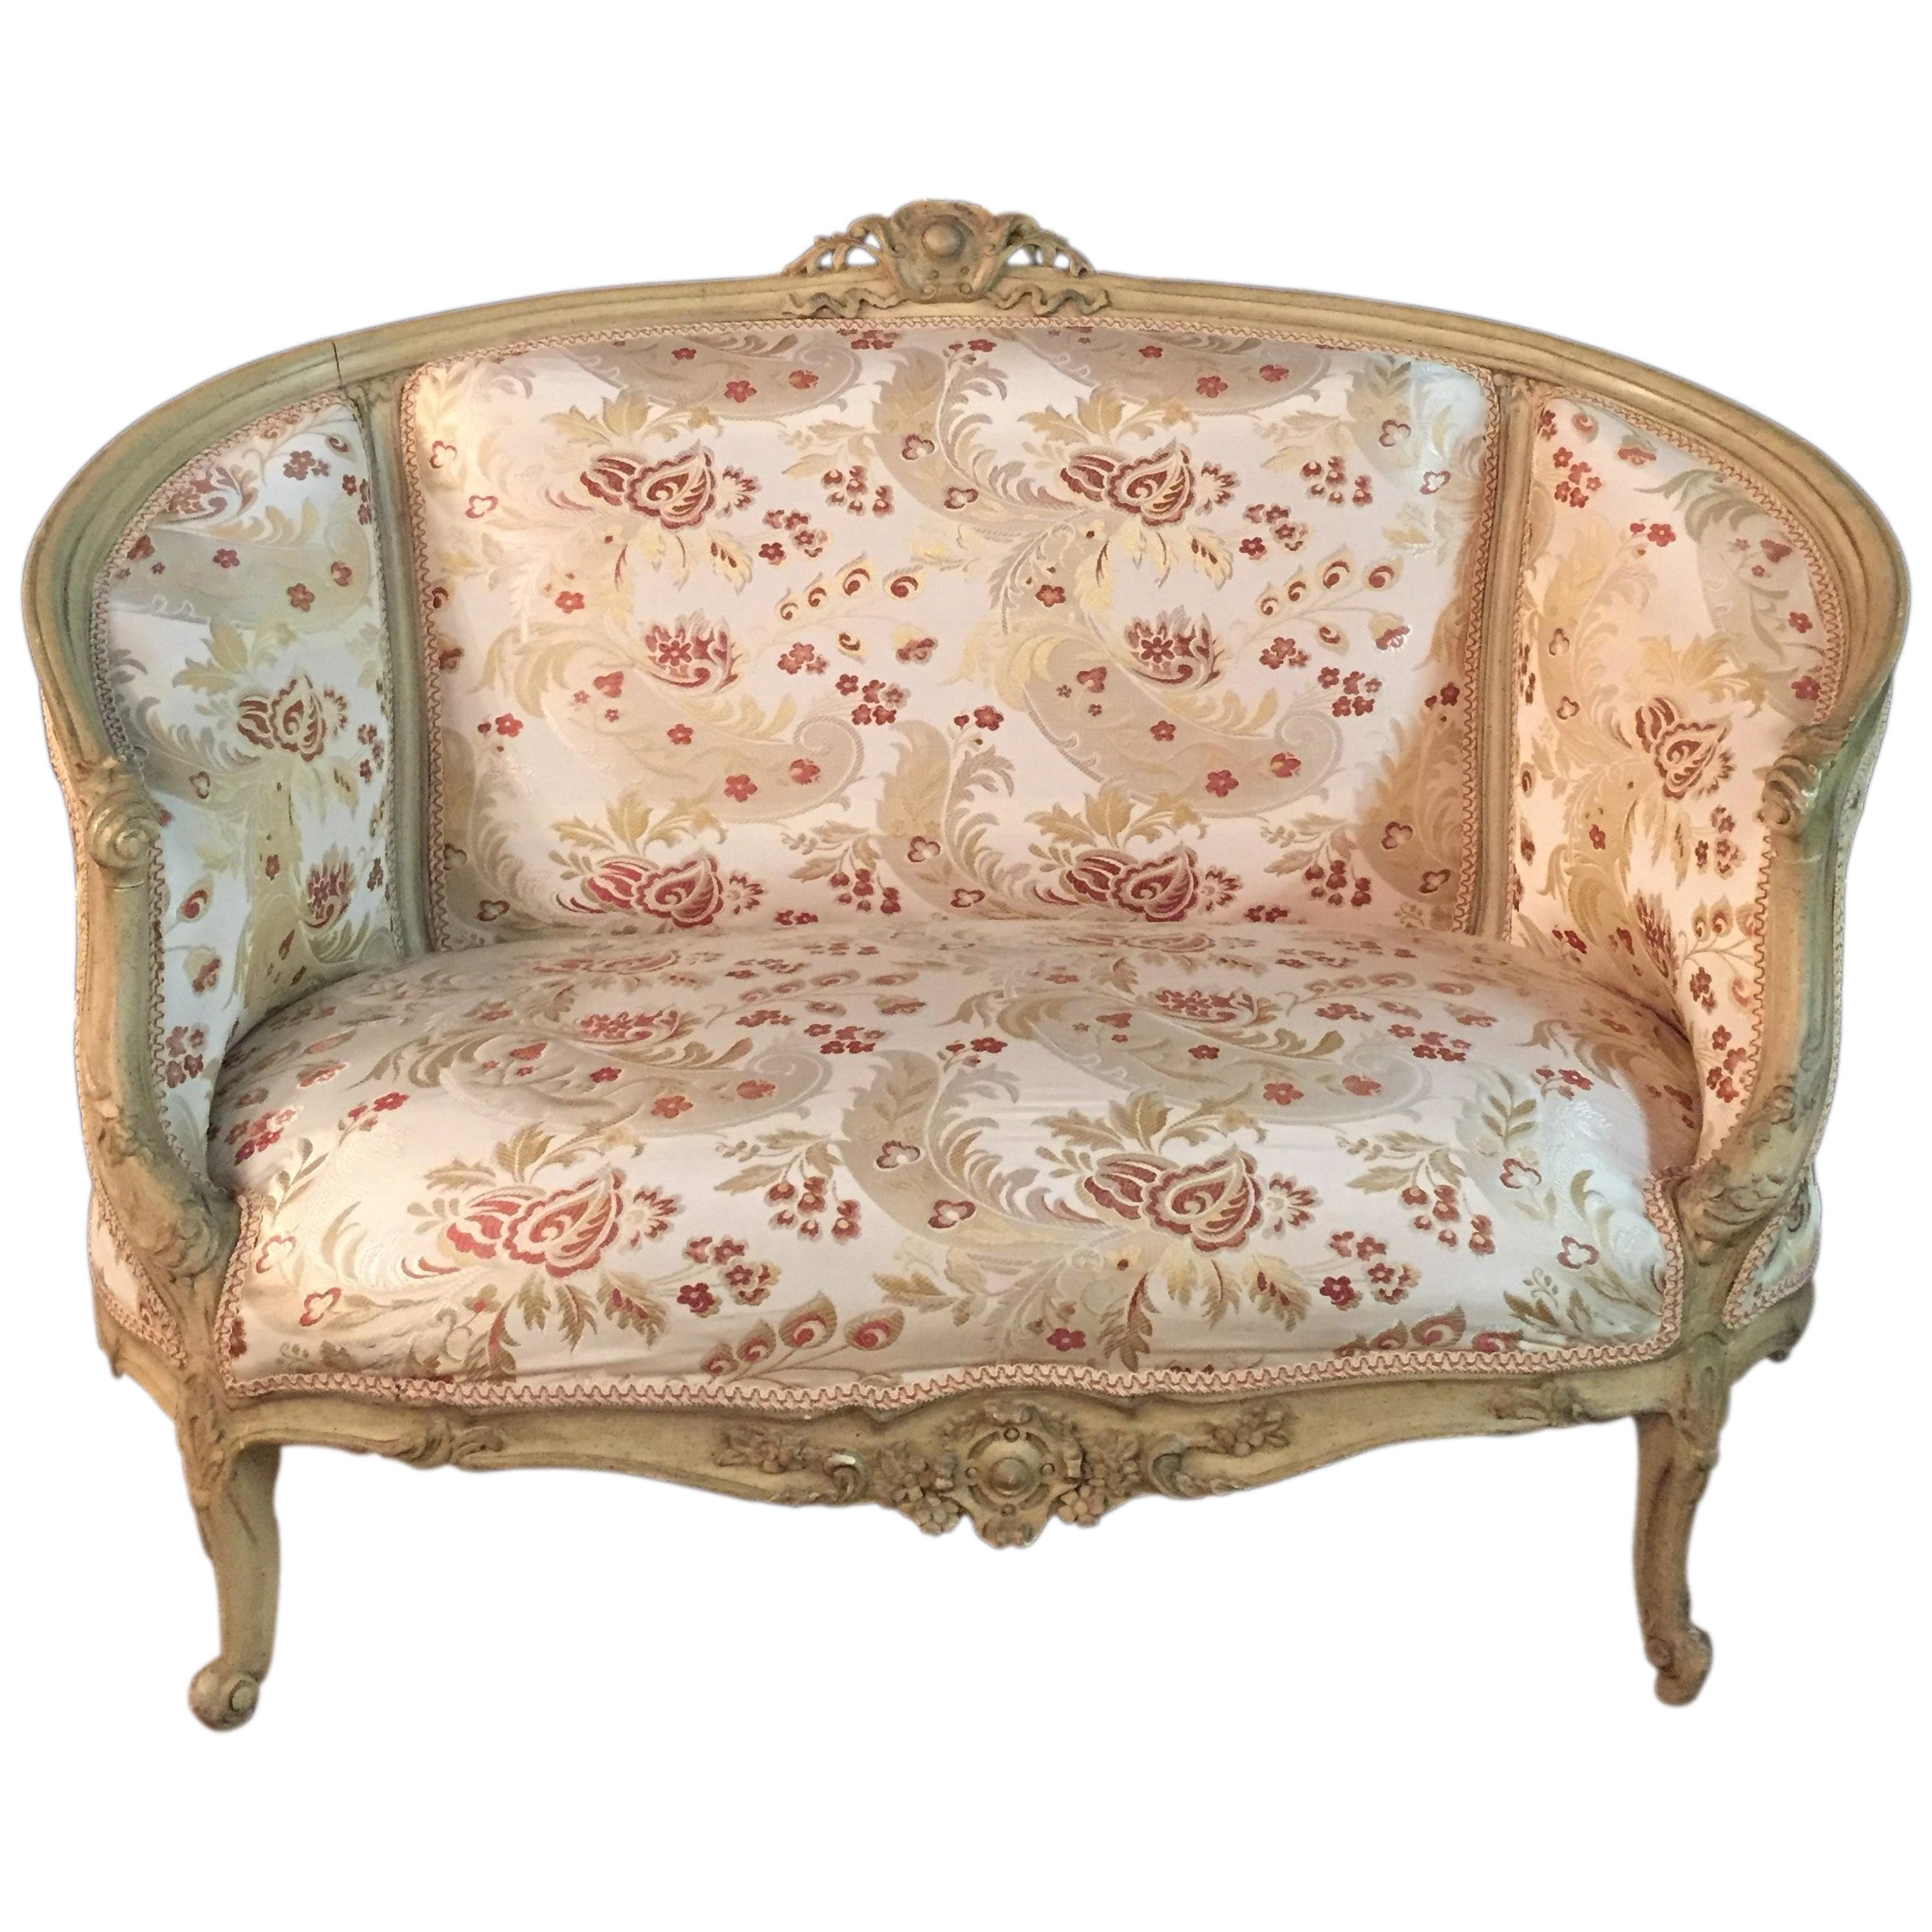 20th Century, French Sofa / canapé in antique Louis Quinze Style